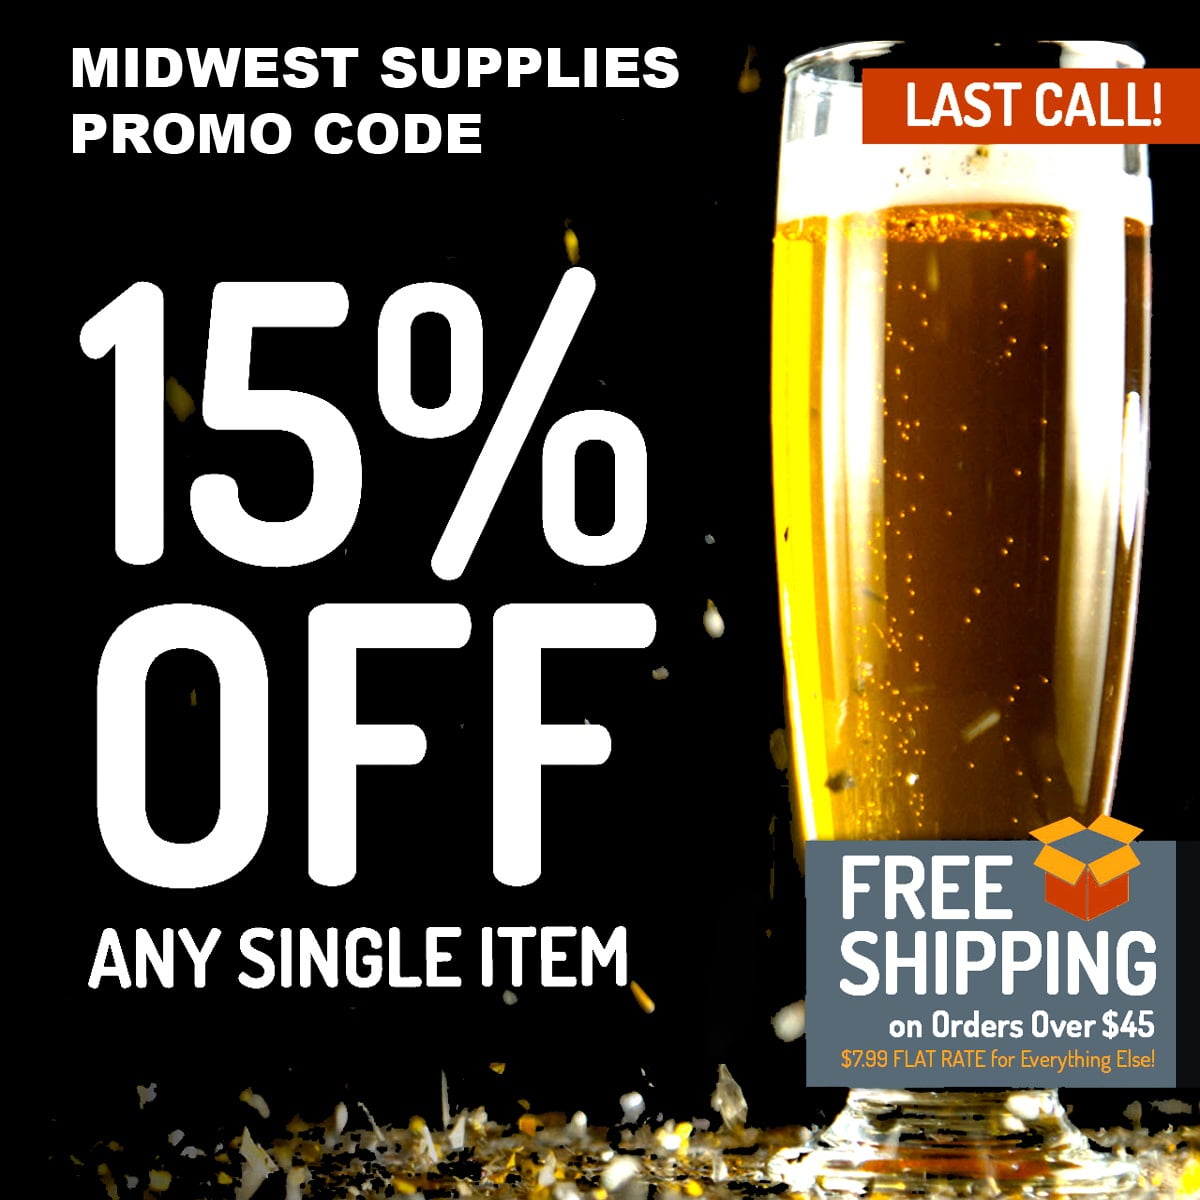 Save 15% On A Single Item at MidwestSupplies.com